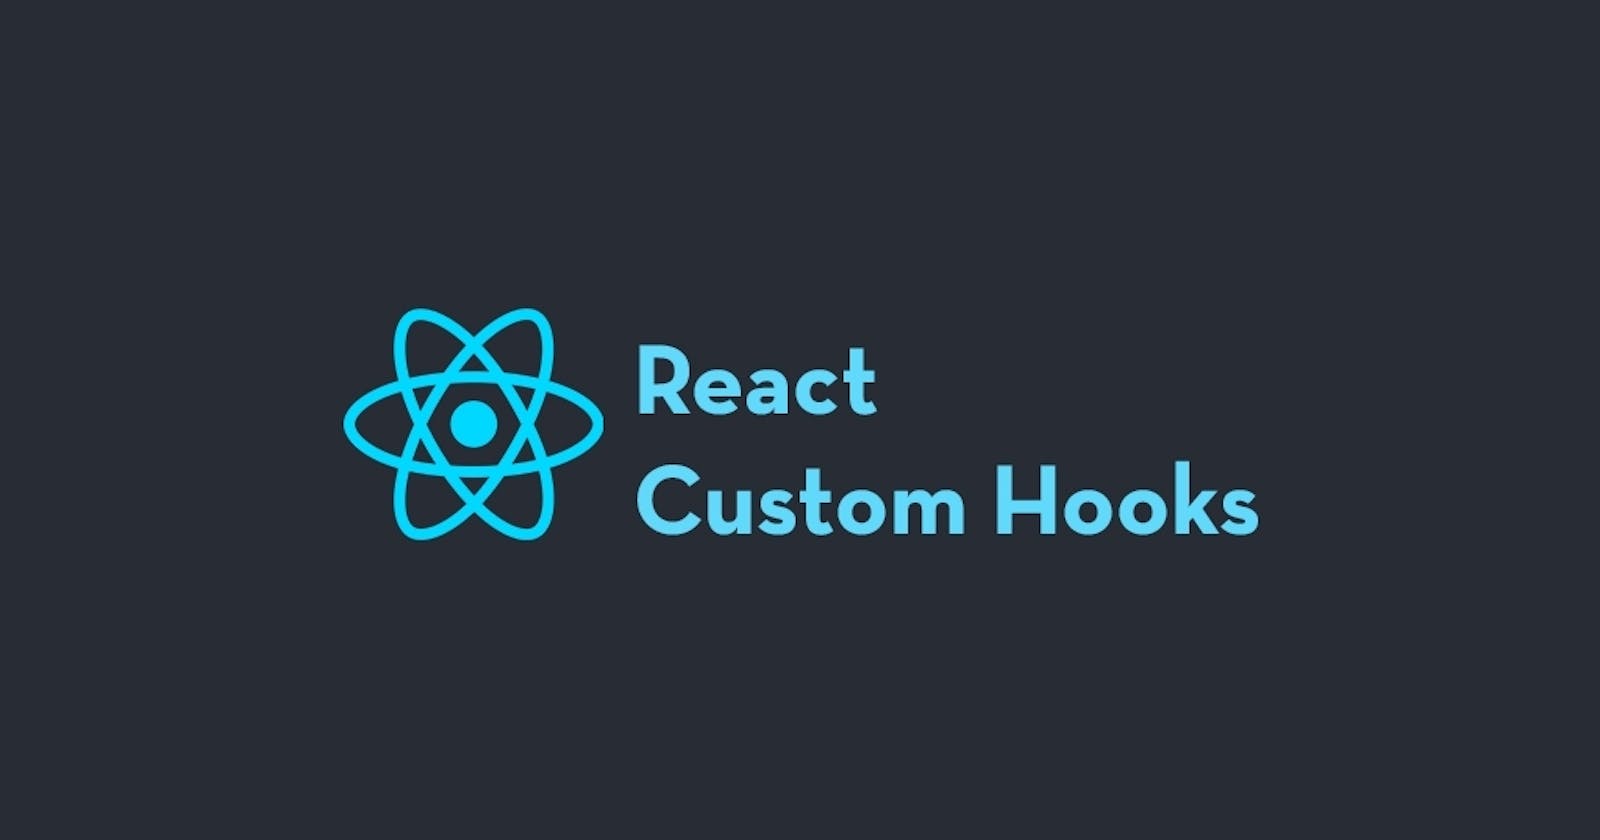 How to use React Custom Hooks to persist React state in Local Storage.